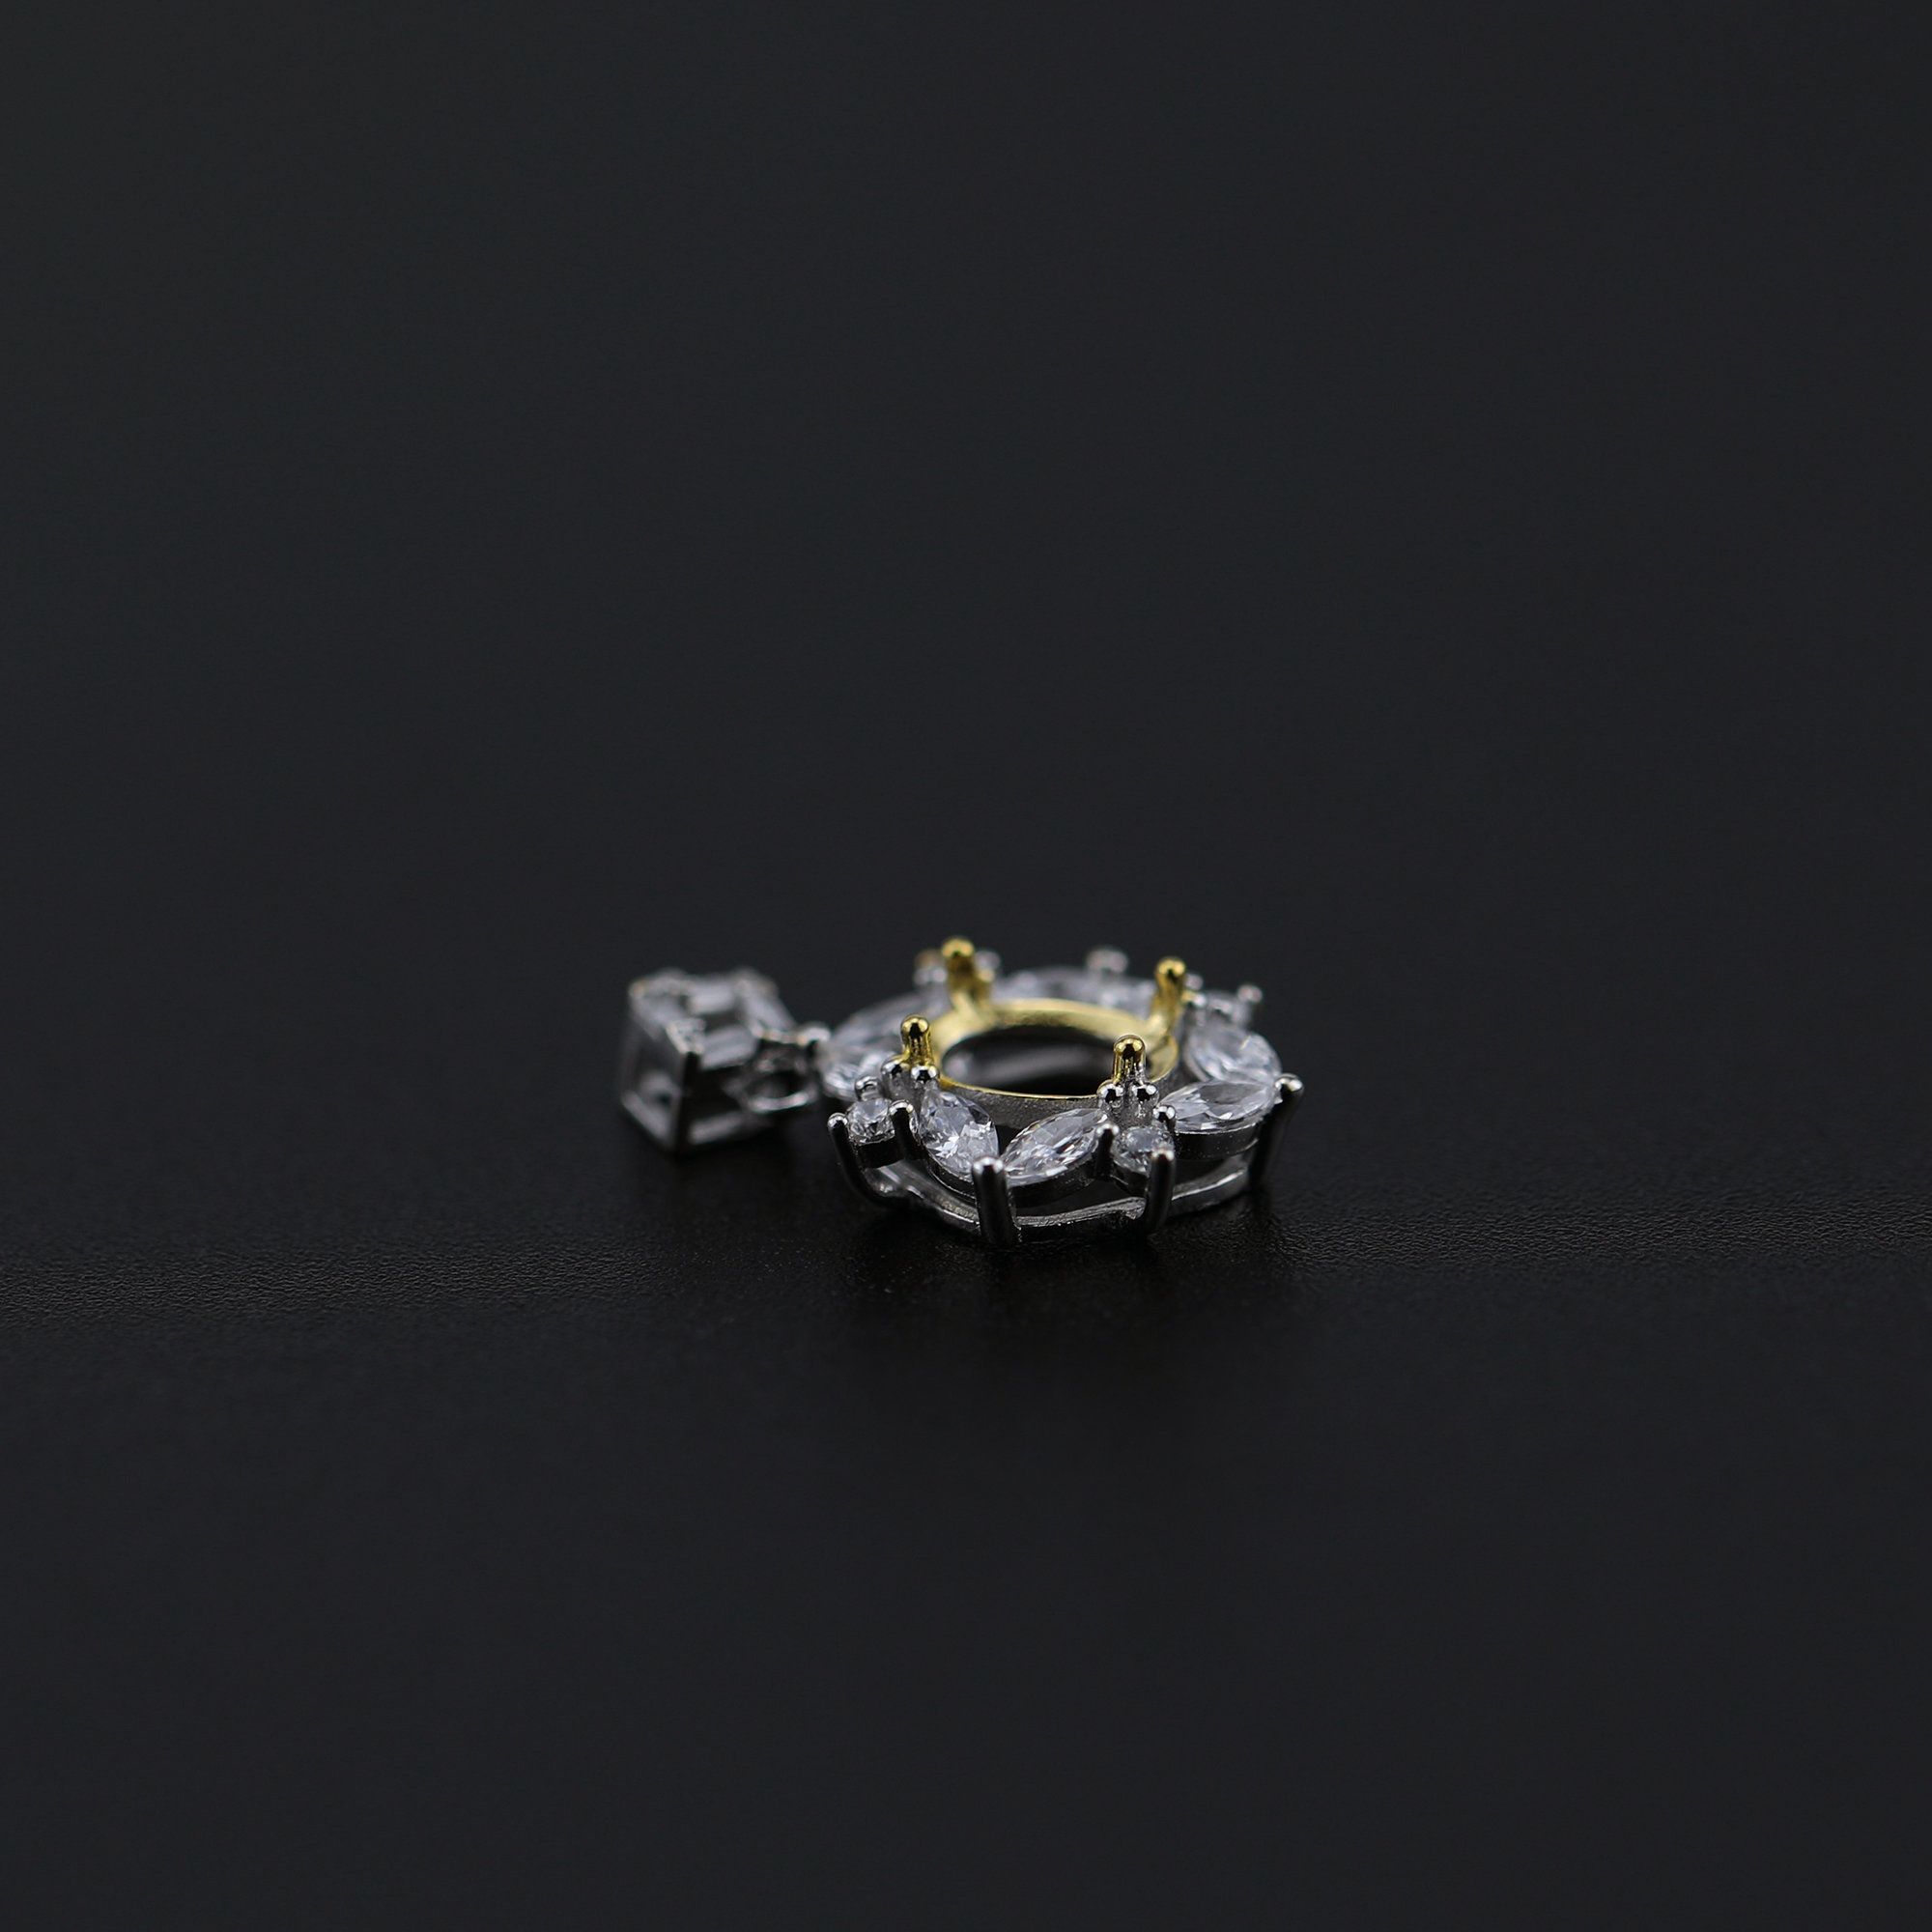 1Pcs 6x8MM Flower Oval Prong Bezel Gold Plated Solid 925 Sterling Silver Pendant Blank Settings for Moissanite Gemstone 1421121 - Click Image to Close